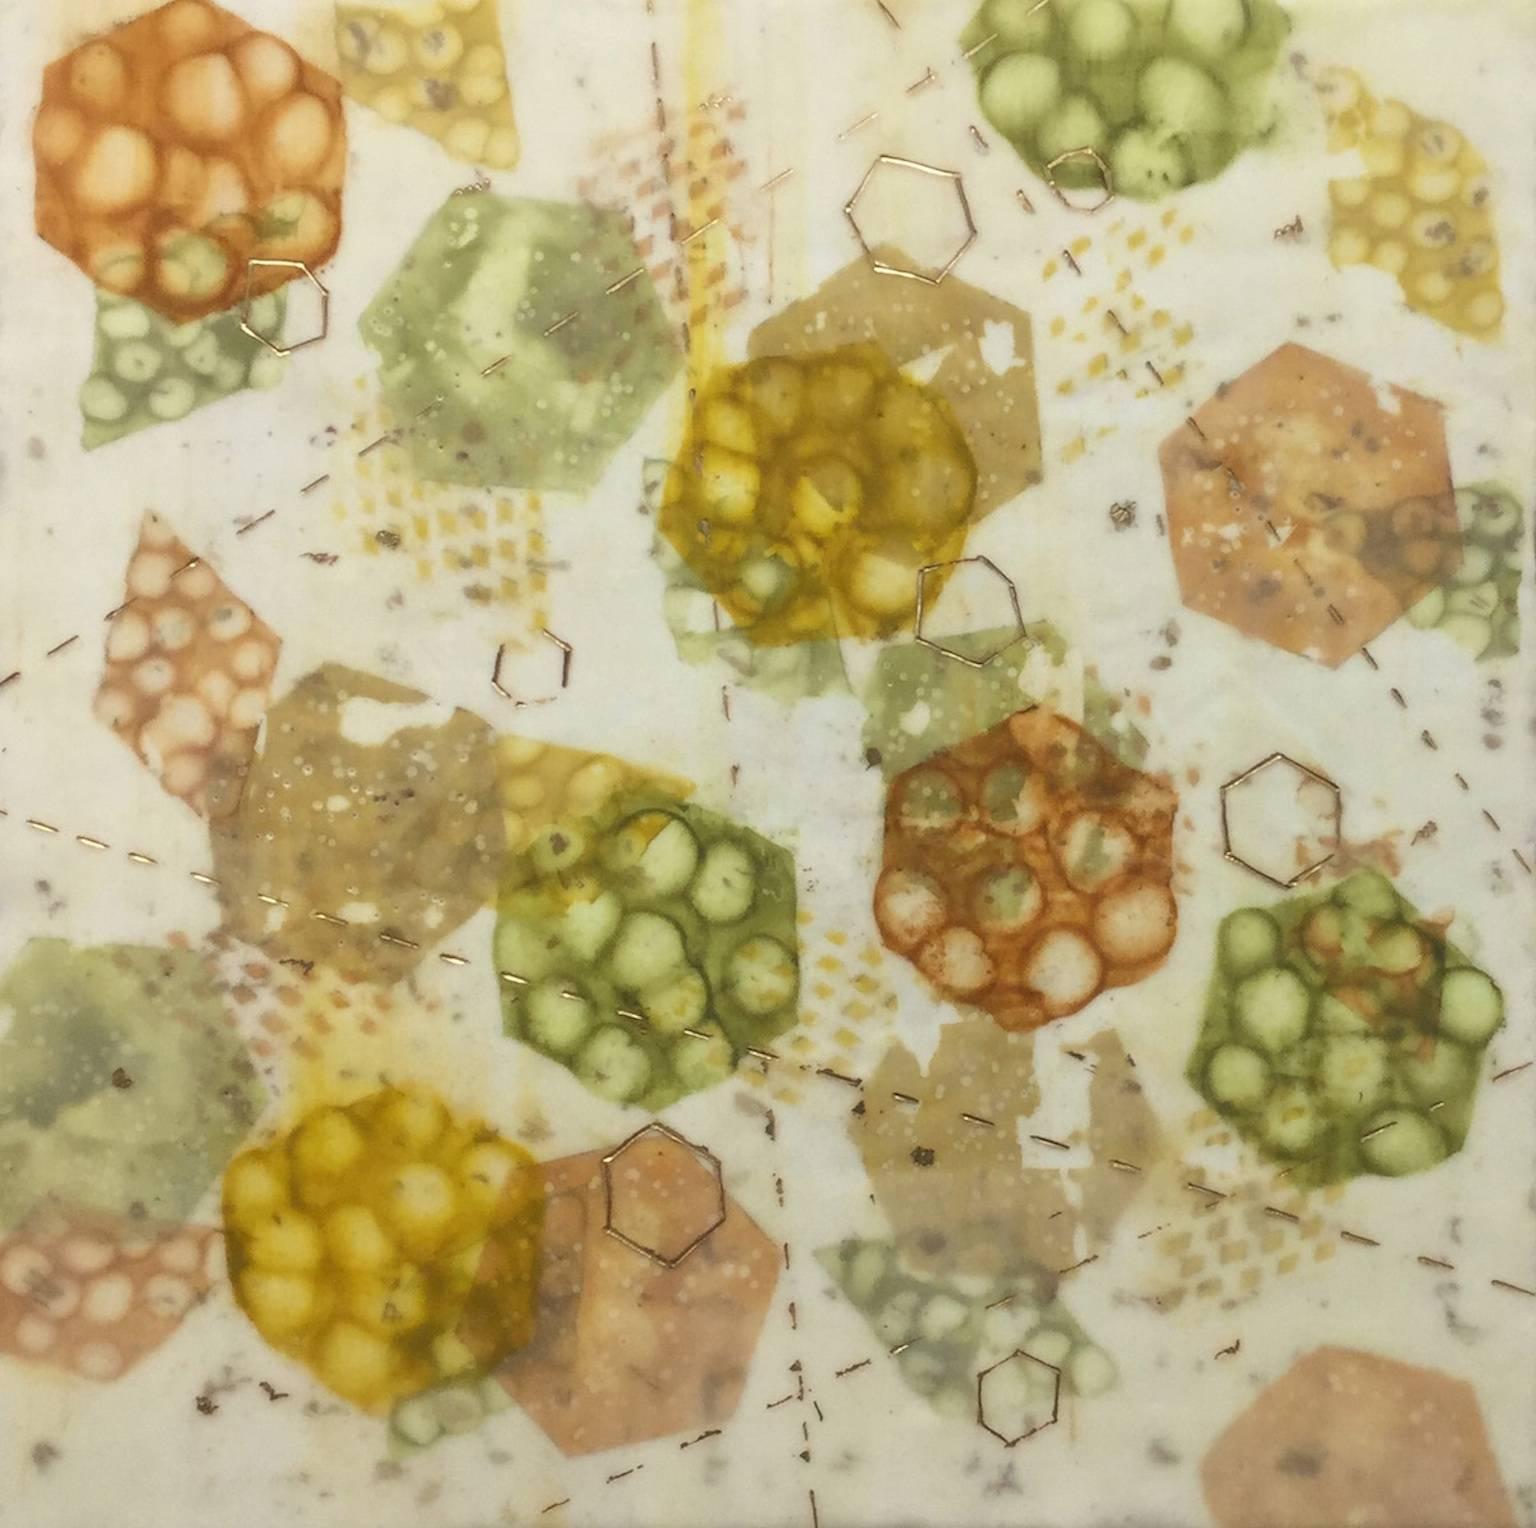 "Bio System 3", abstract, encaustic, pastel, microscopic, ochres, gold, greens